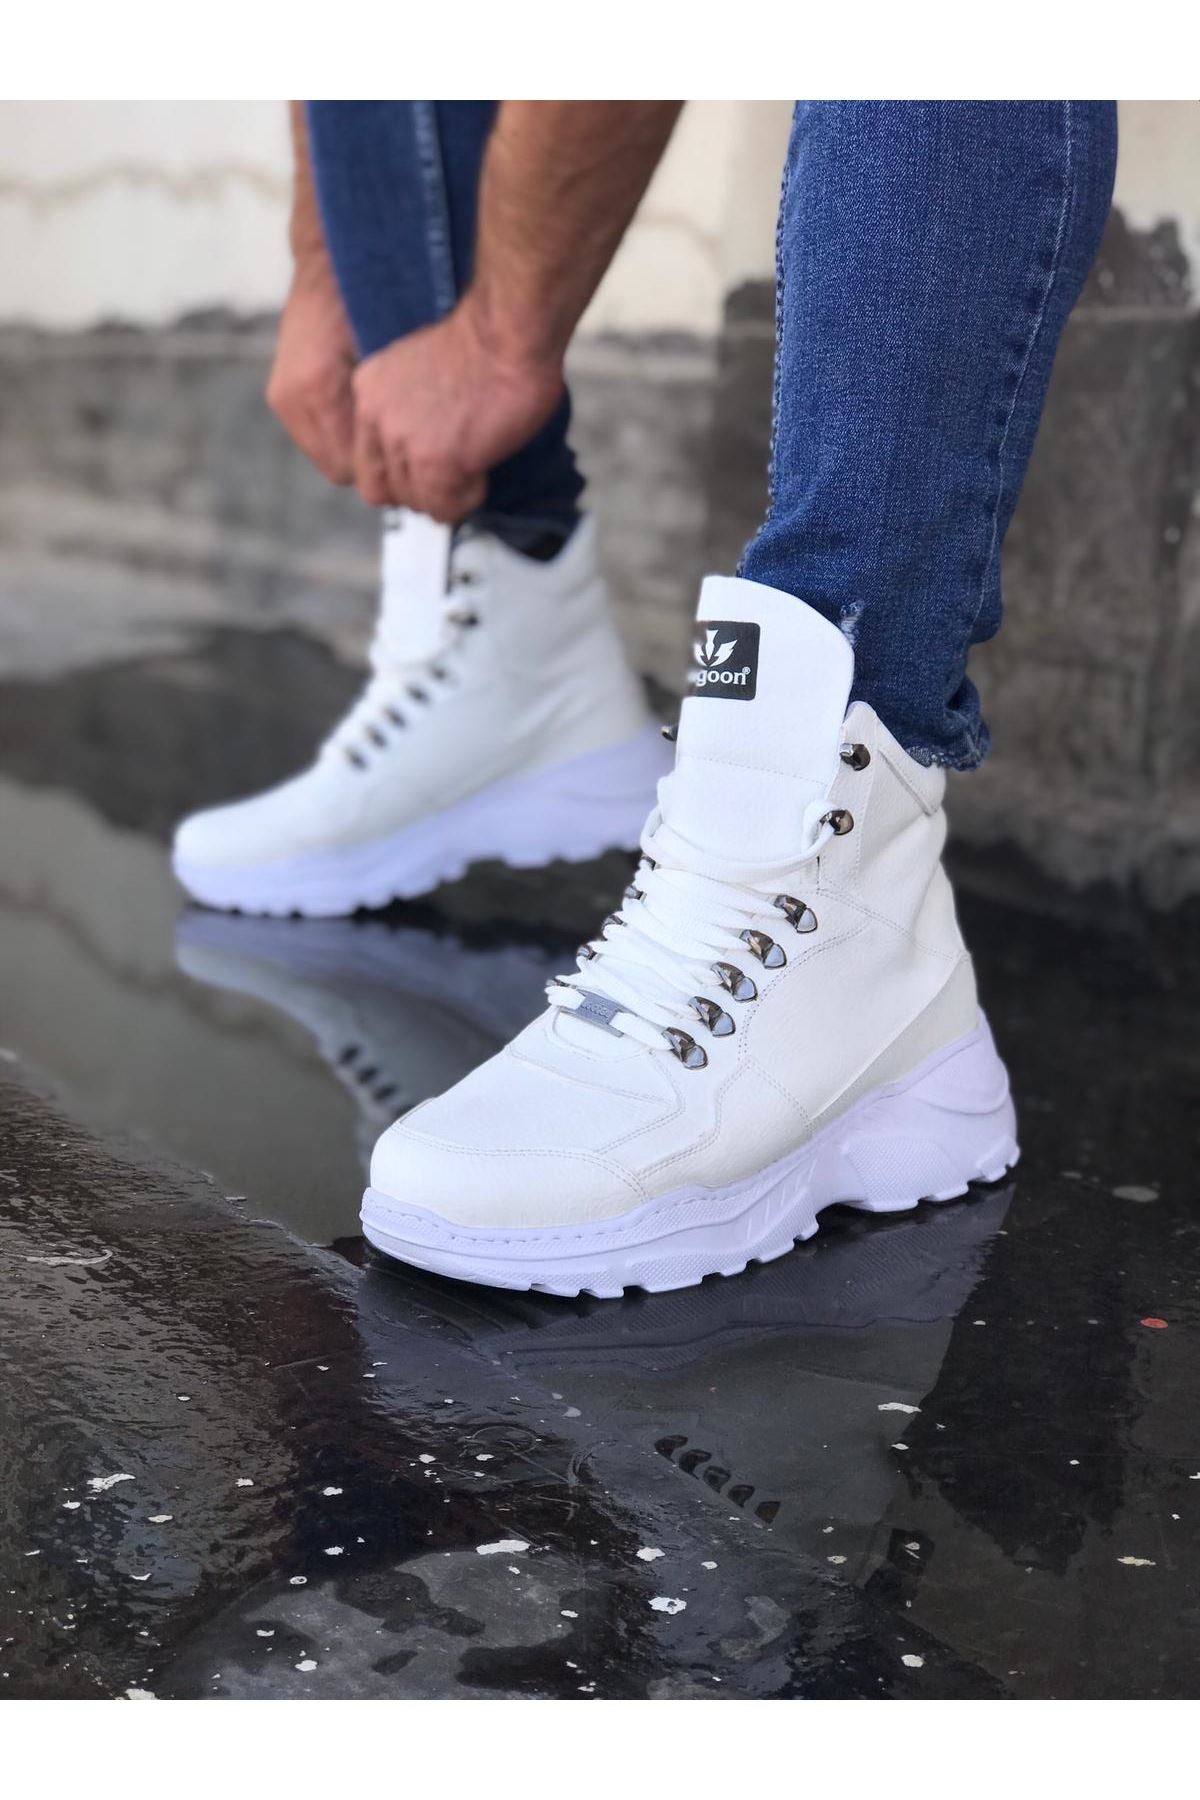 Original Design WG07 White Color Long Lace-up Boots - STREETMODE™